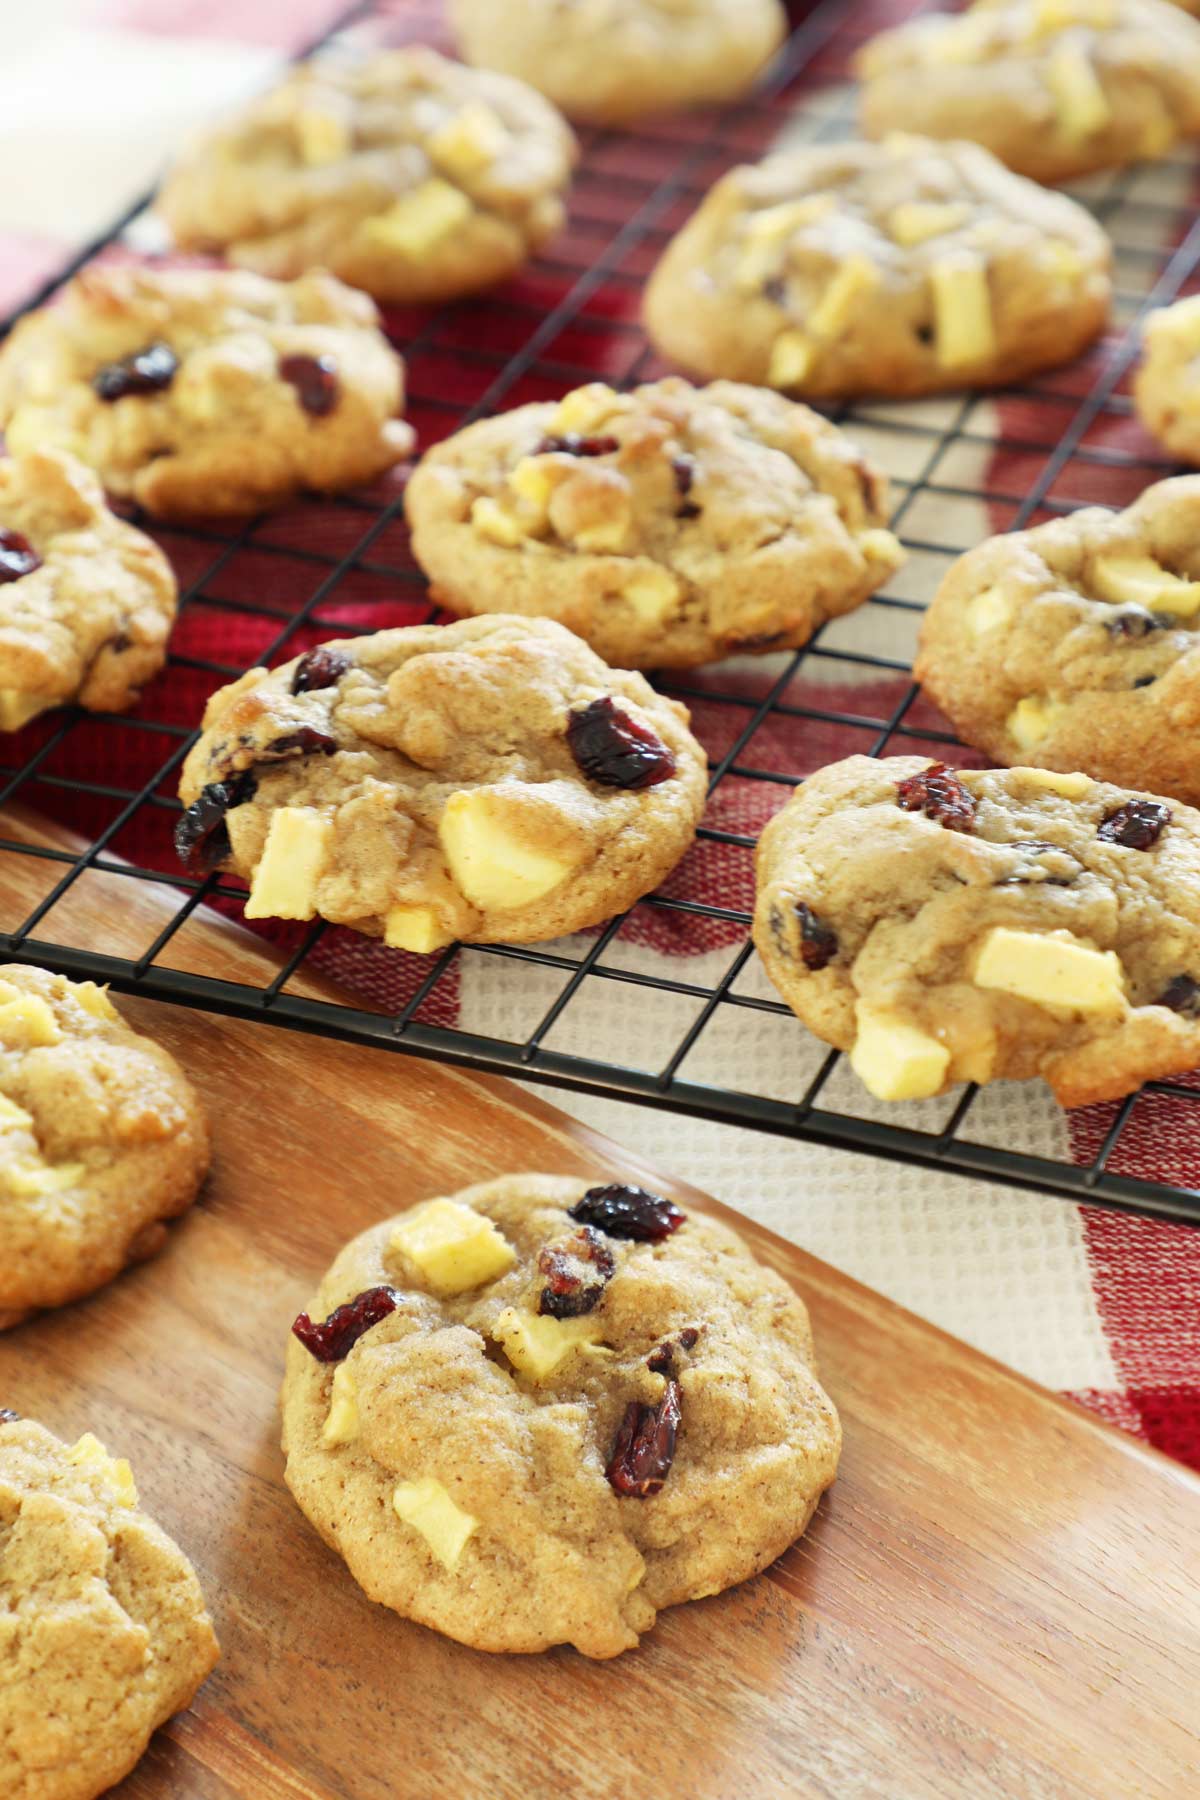 Apple cranberry cookies cooking on a baking rack, one cookie sits on a wooden board.